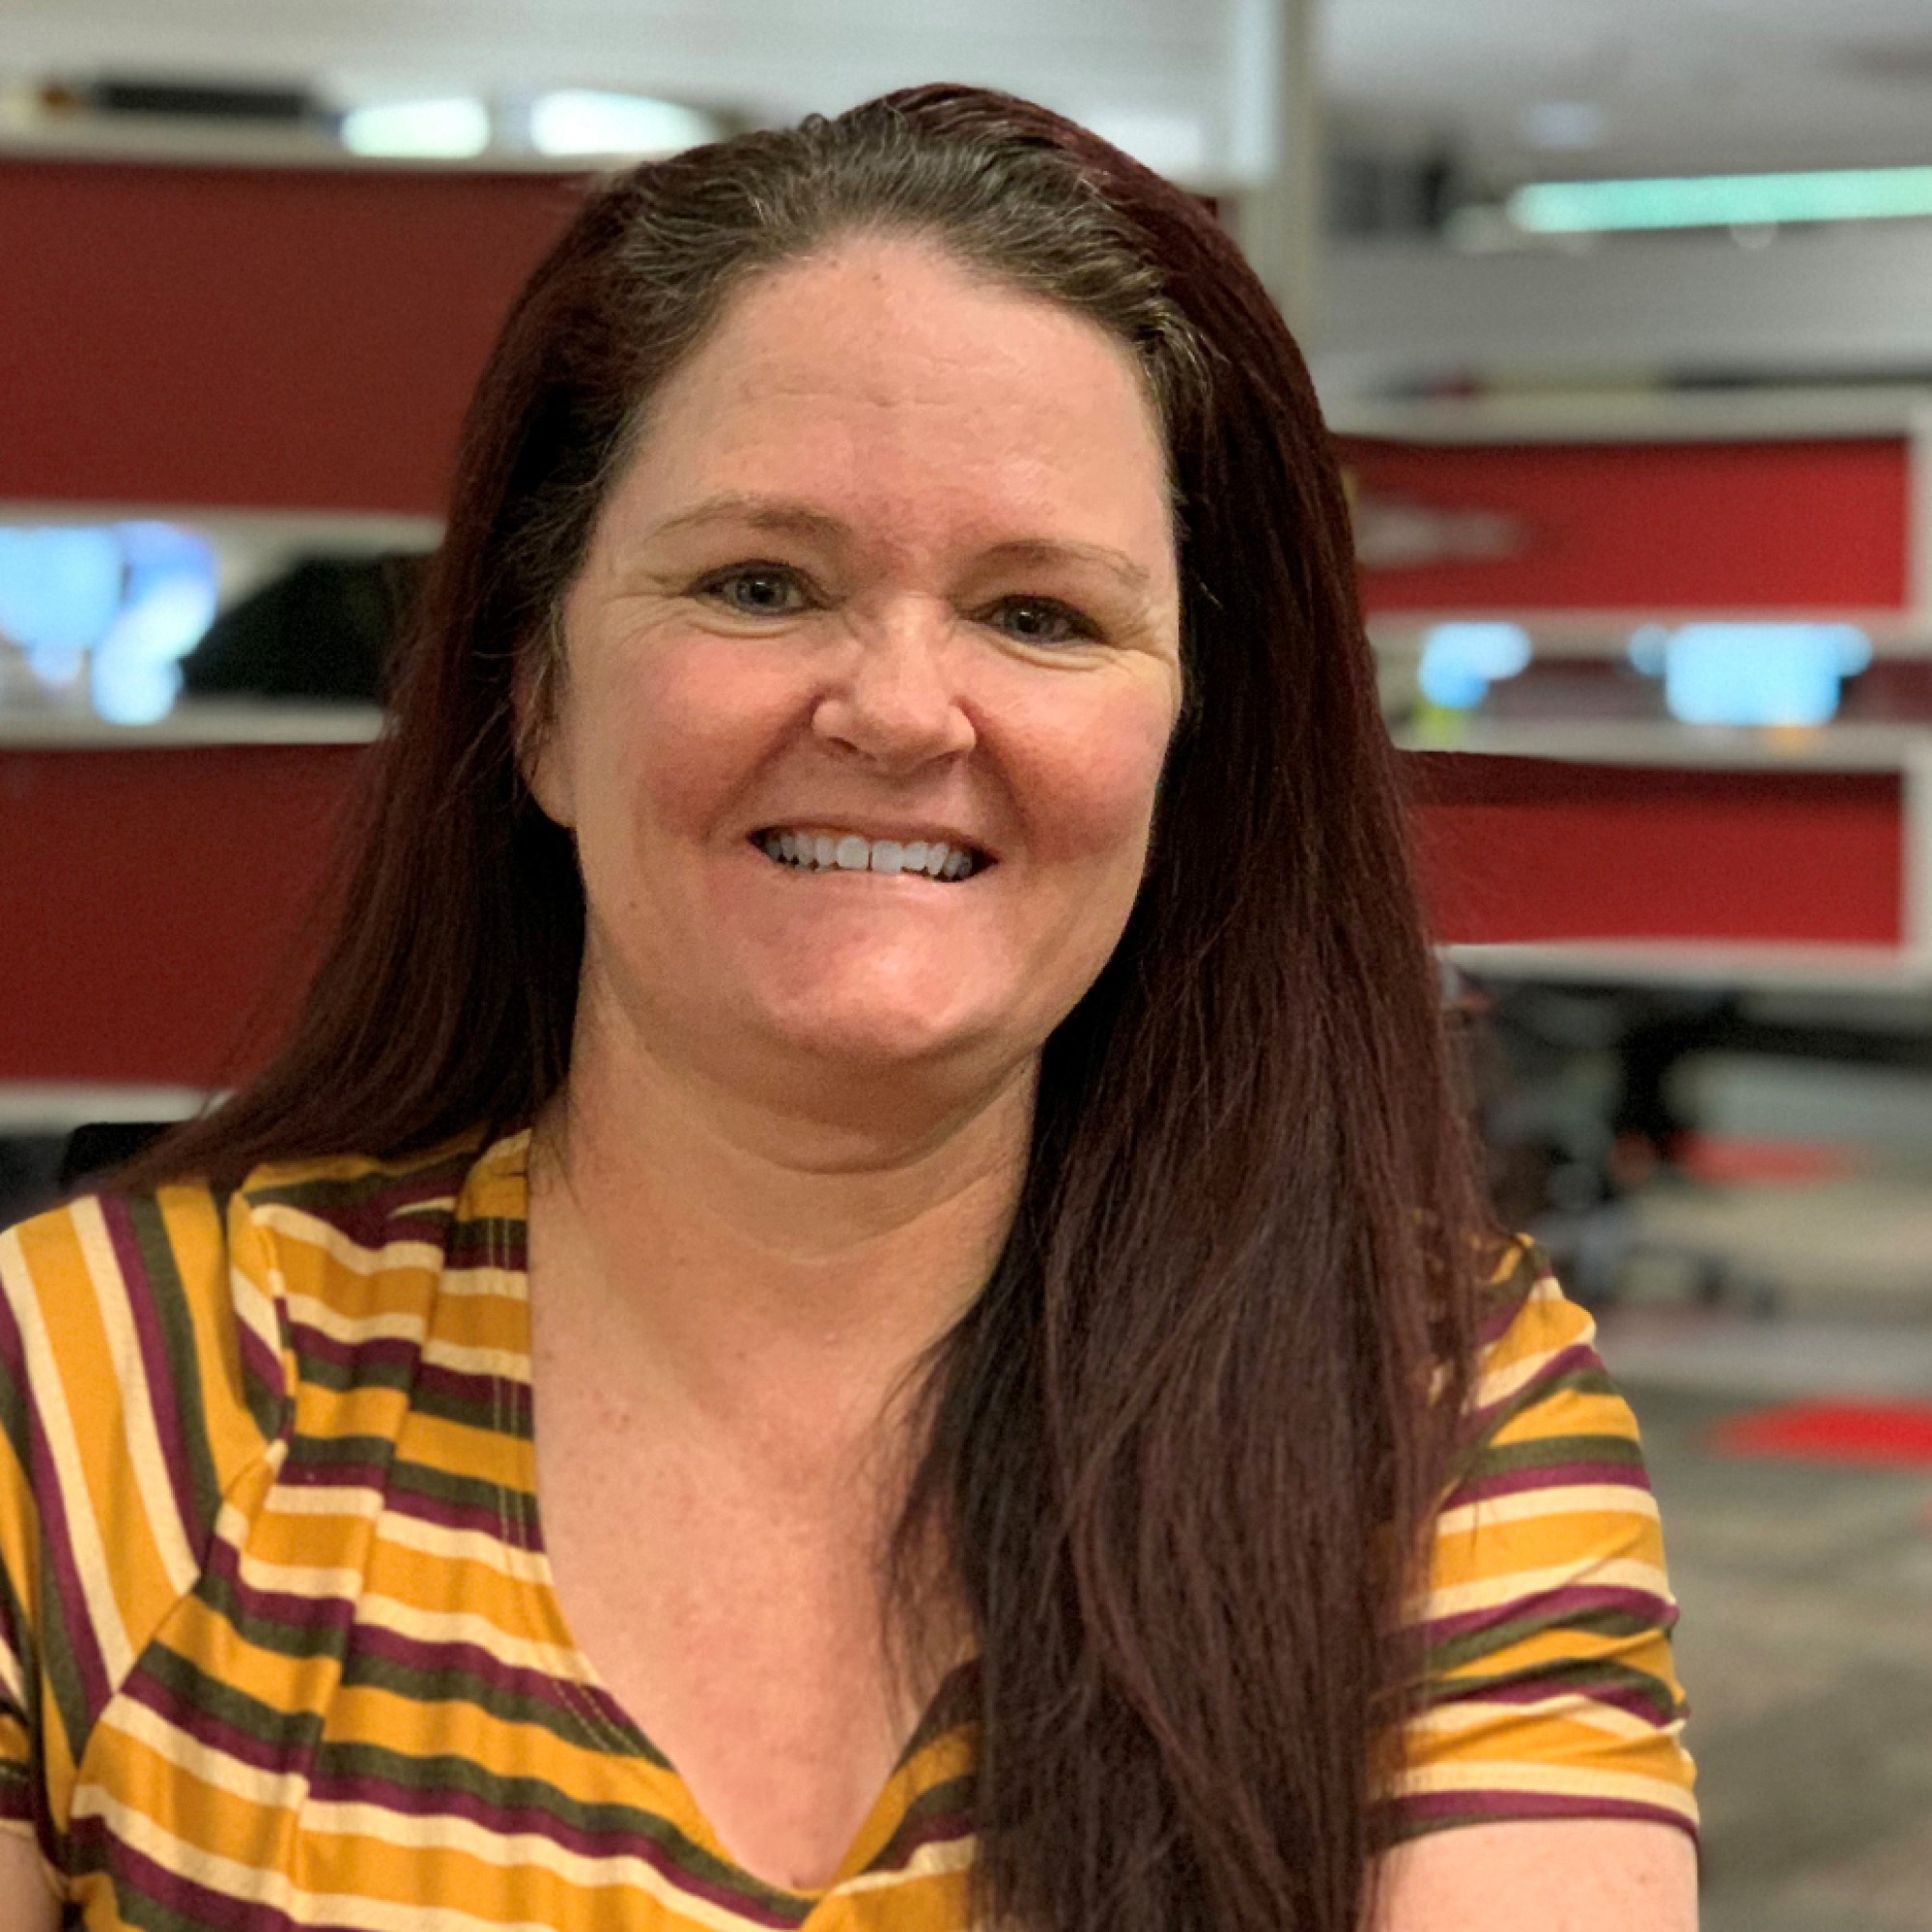 Piper Skoglund, Staff of the Month for January 2019